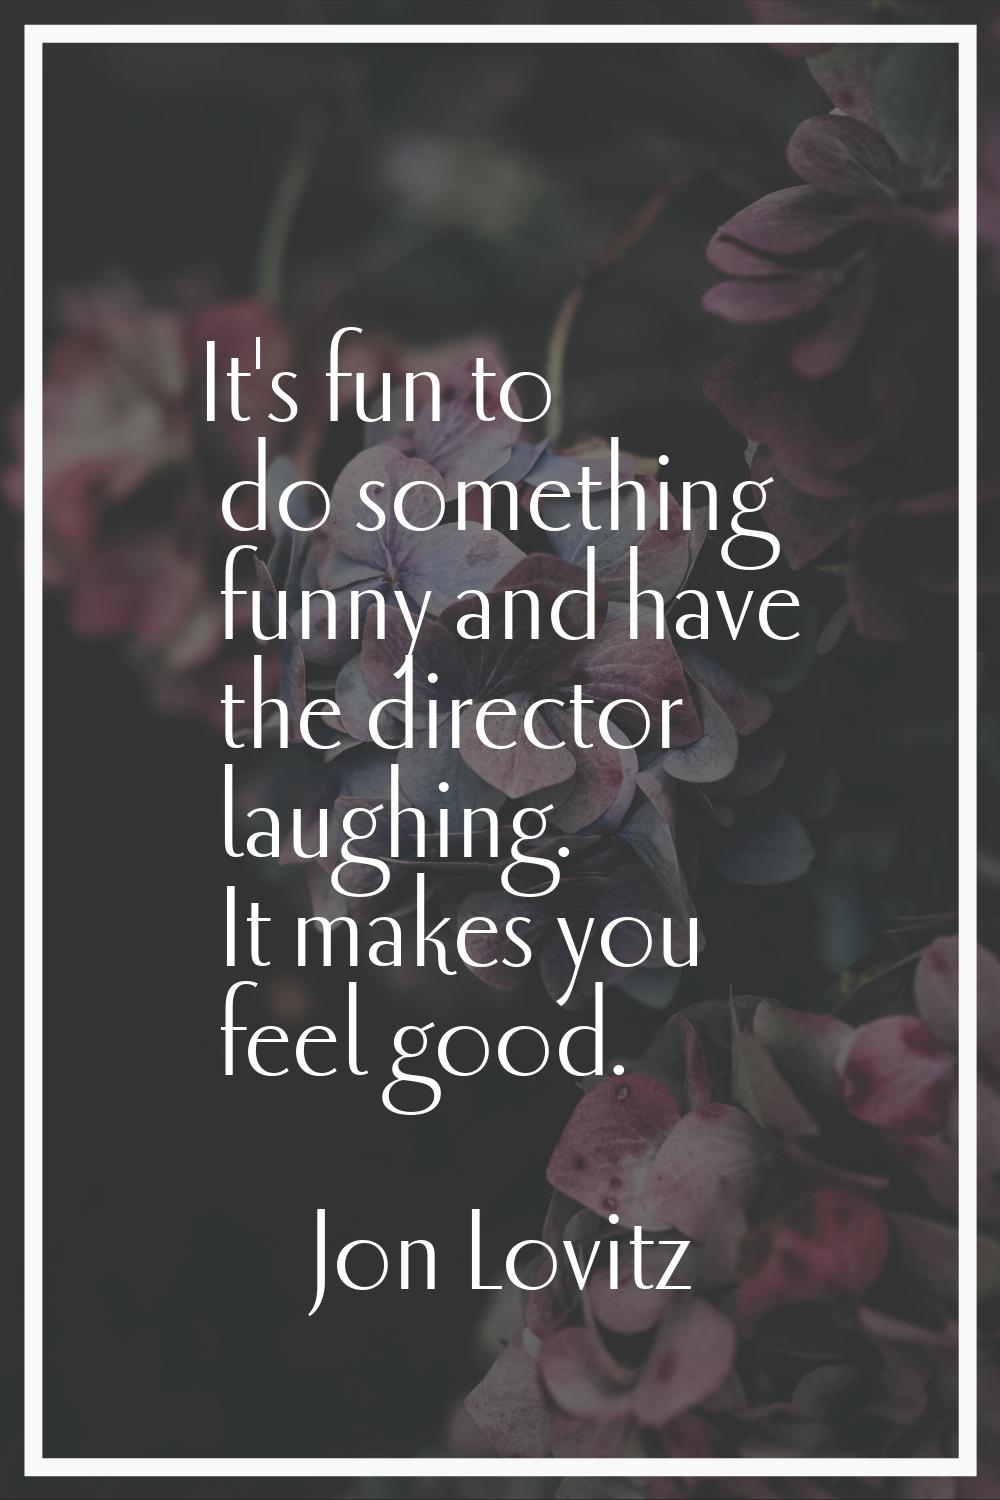 It's fun to do something funny and have the director laughing. It makes you feel good.